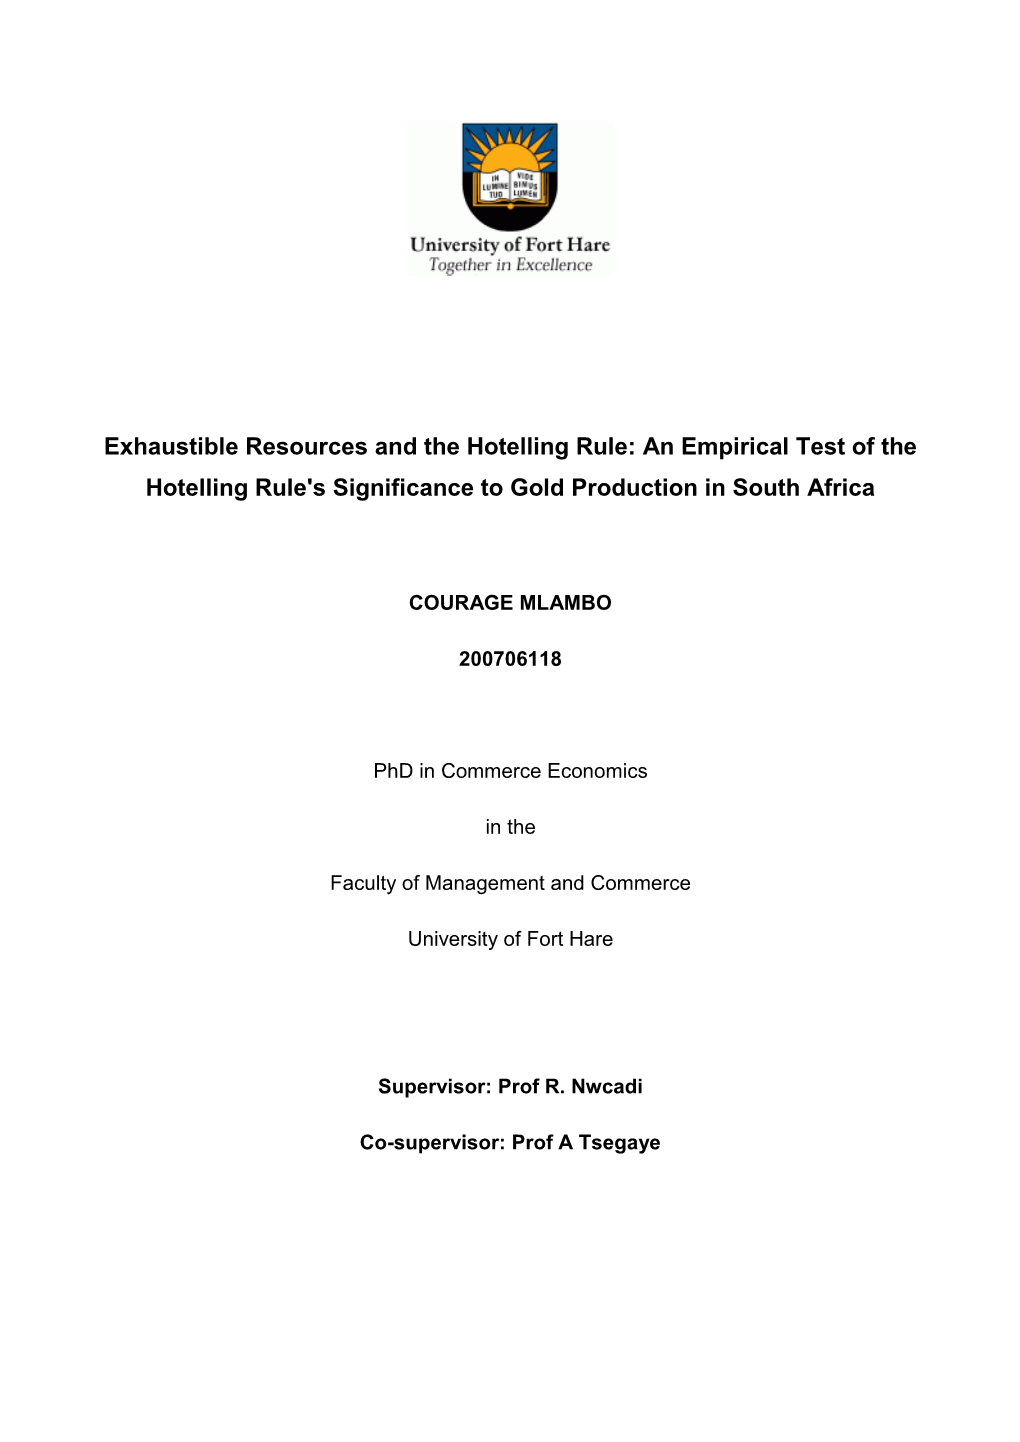 Exhaustible Resources and the Hotelling Rule: an Empirical Test of the Hotelling Rule's Significance to Gold Production in South Africa